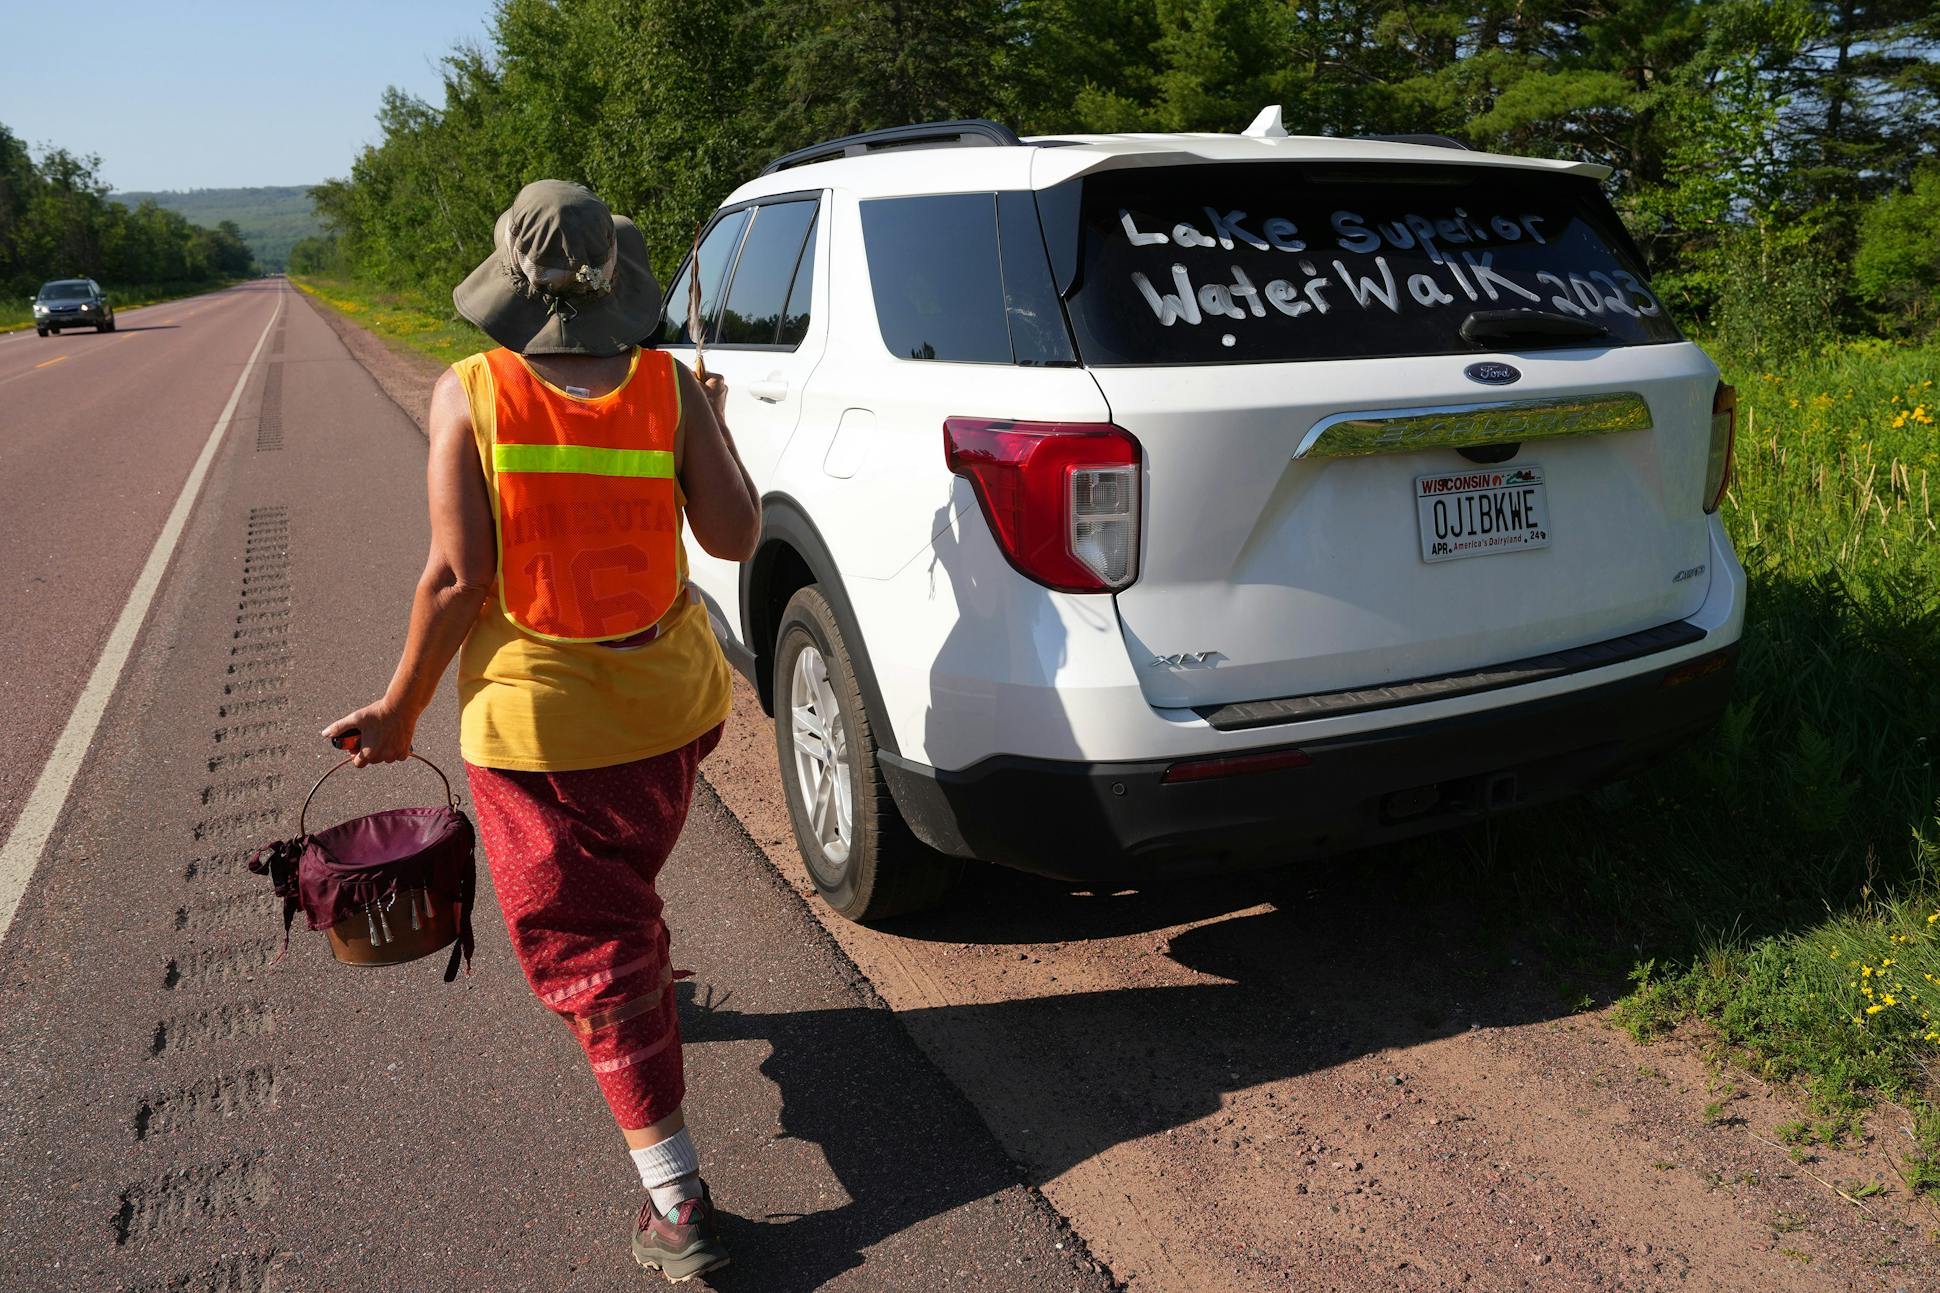 Jane Ramseyer Miller, one of five core walkers making the entire journey, passes one of the caravan's vehicles.